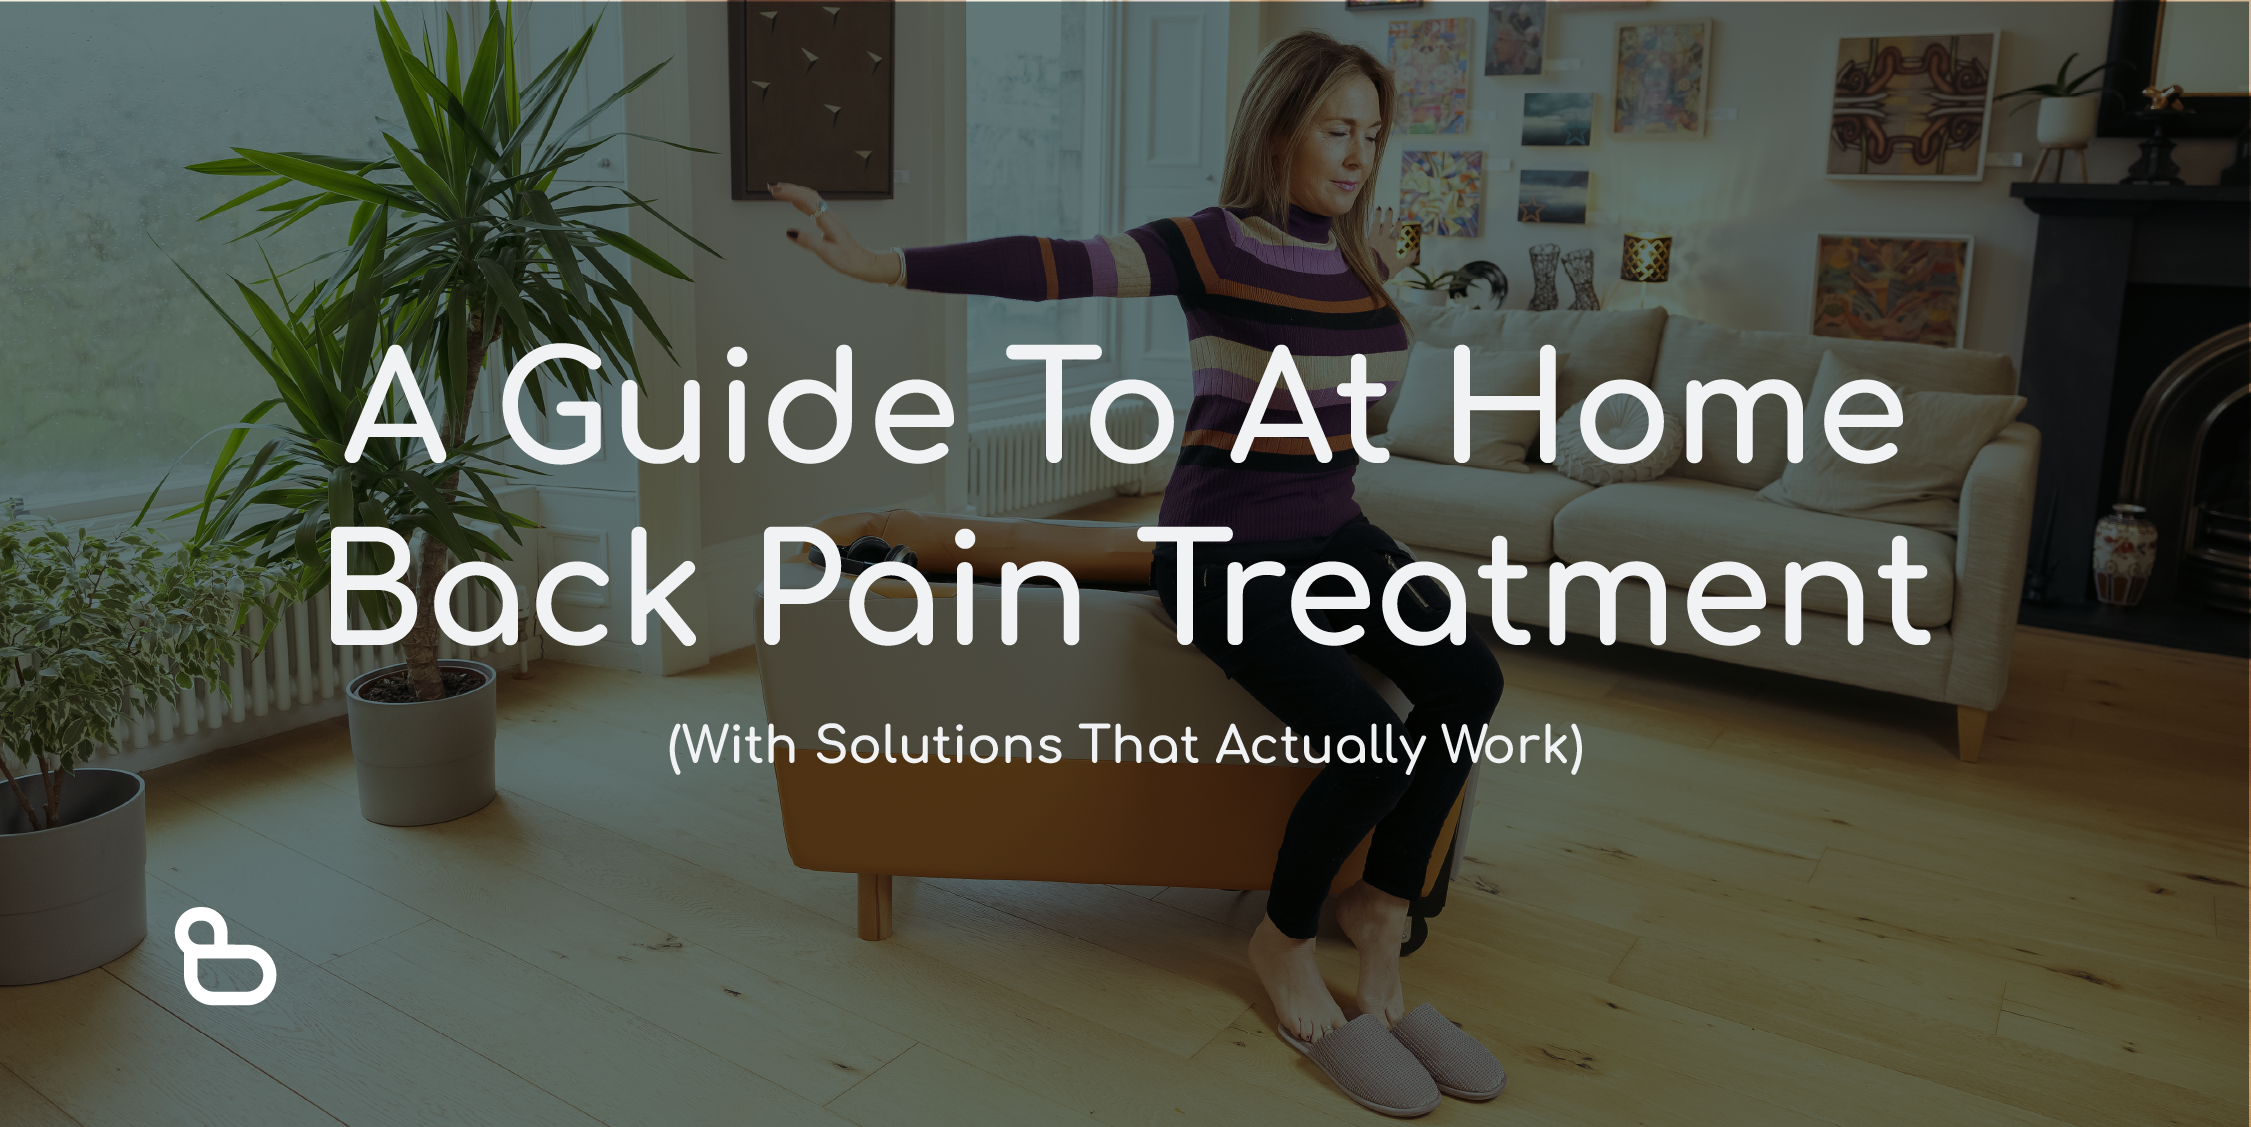 A Guide To At Home Back Pain Treatment (With Solutions That Actually Work)